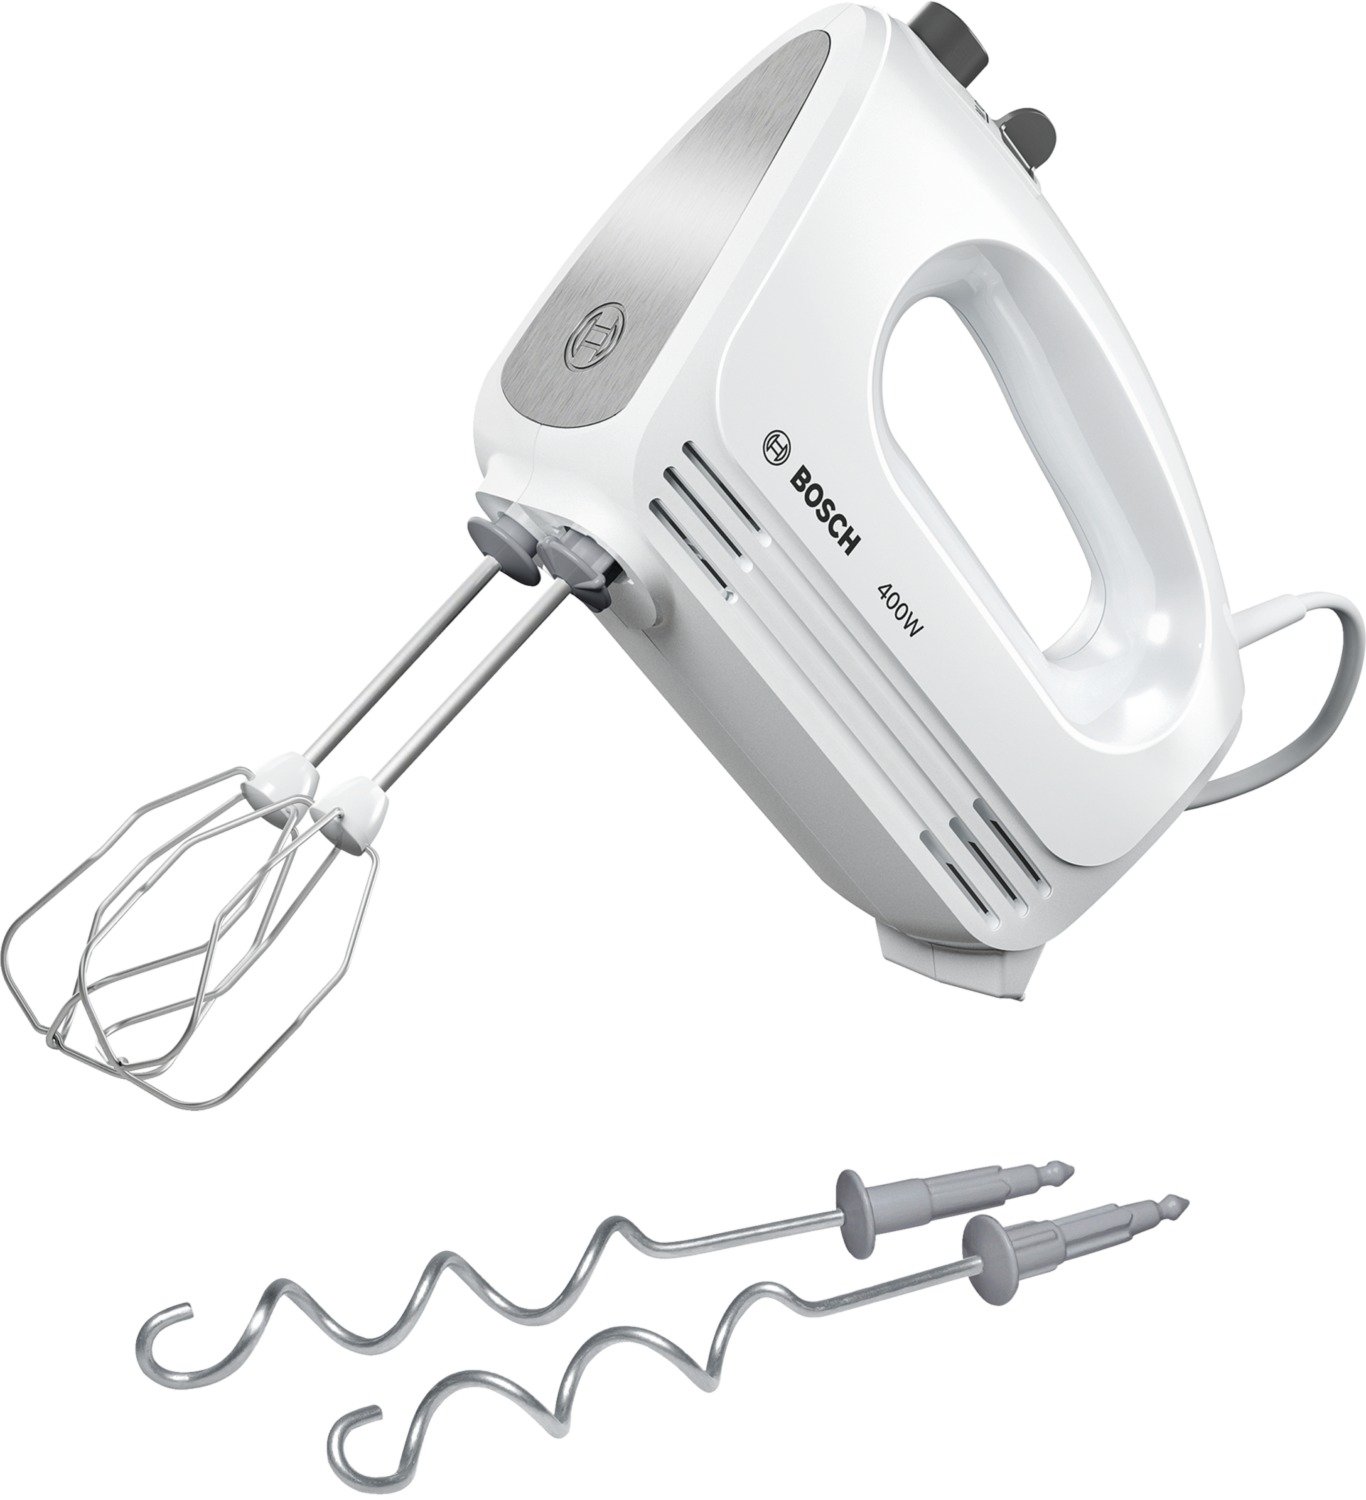 LILPARTNER Hand Mixer Electric, 400w Ultra Power Kitchen Hand Mixer With 2  5-Speed(Turbo Boost, Automatic Speed) & 5 Stainless Steel Accessories for  Whipping Dough, Cream, Cake, Eject Button (White) 